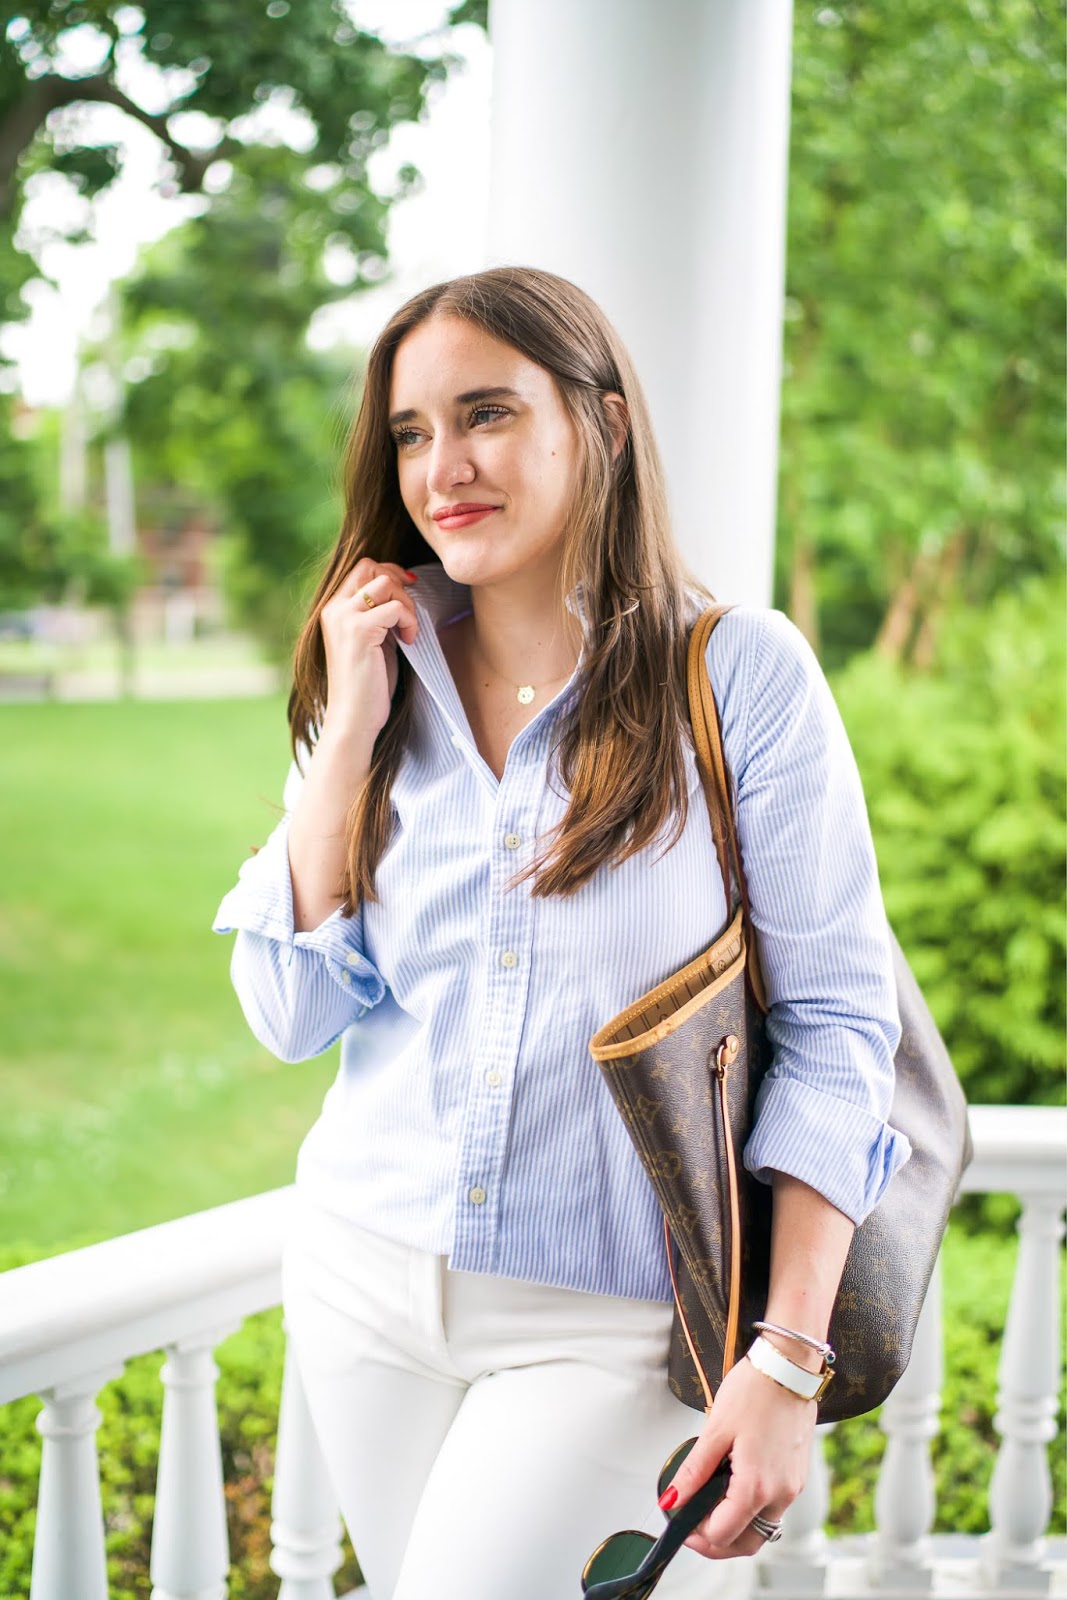 J.Crew Business Casual White Pants featured by popular New York style blogger, Covering the Bases